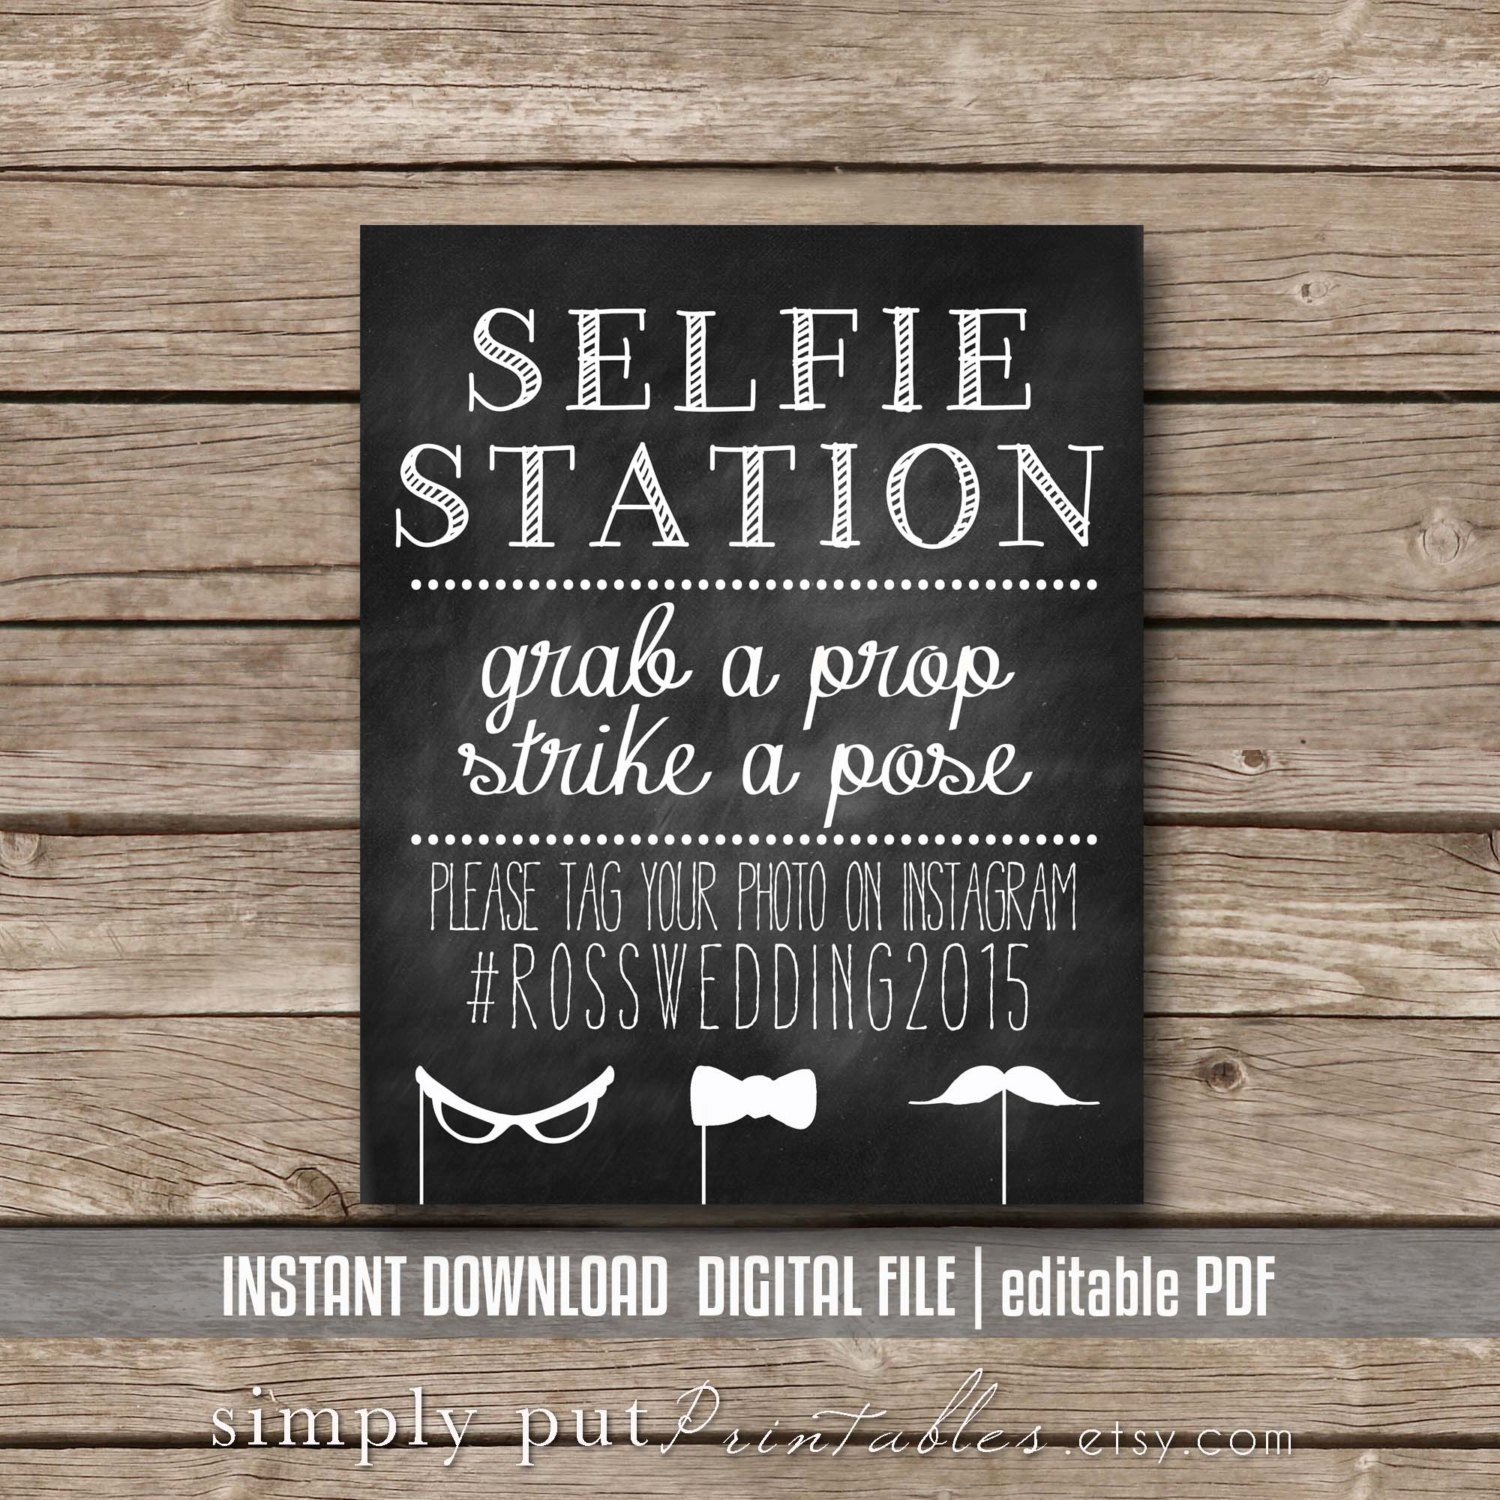 Selfie Station Photo Booth Chalkboard Sign Printable Grab A | Etsy - Selfie Station Free Printable